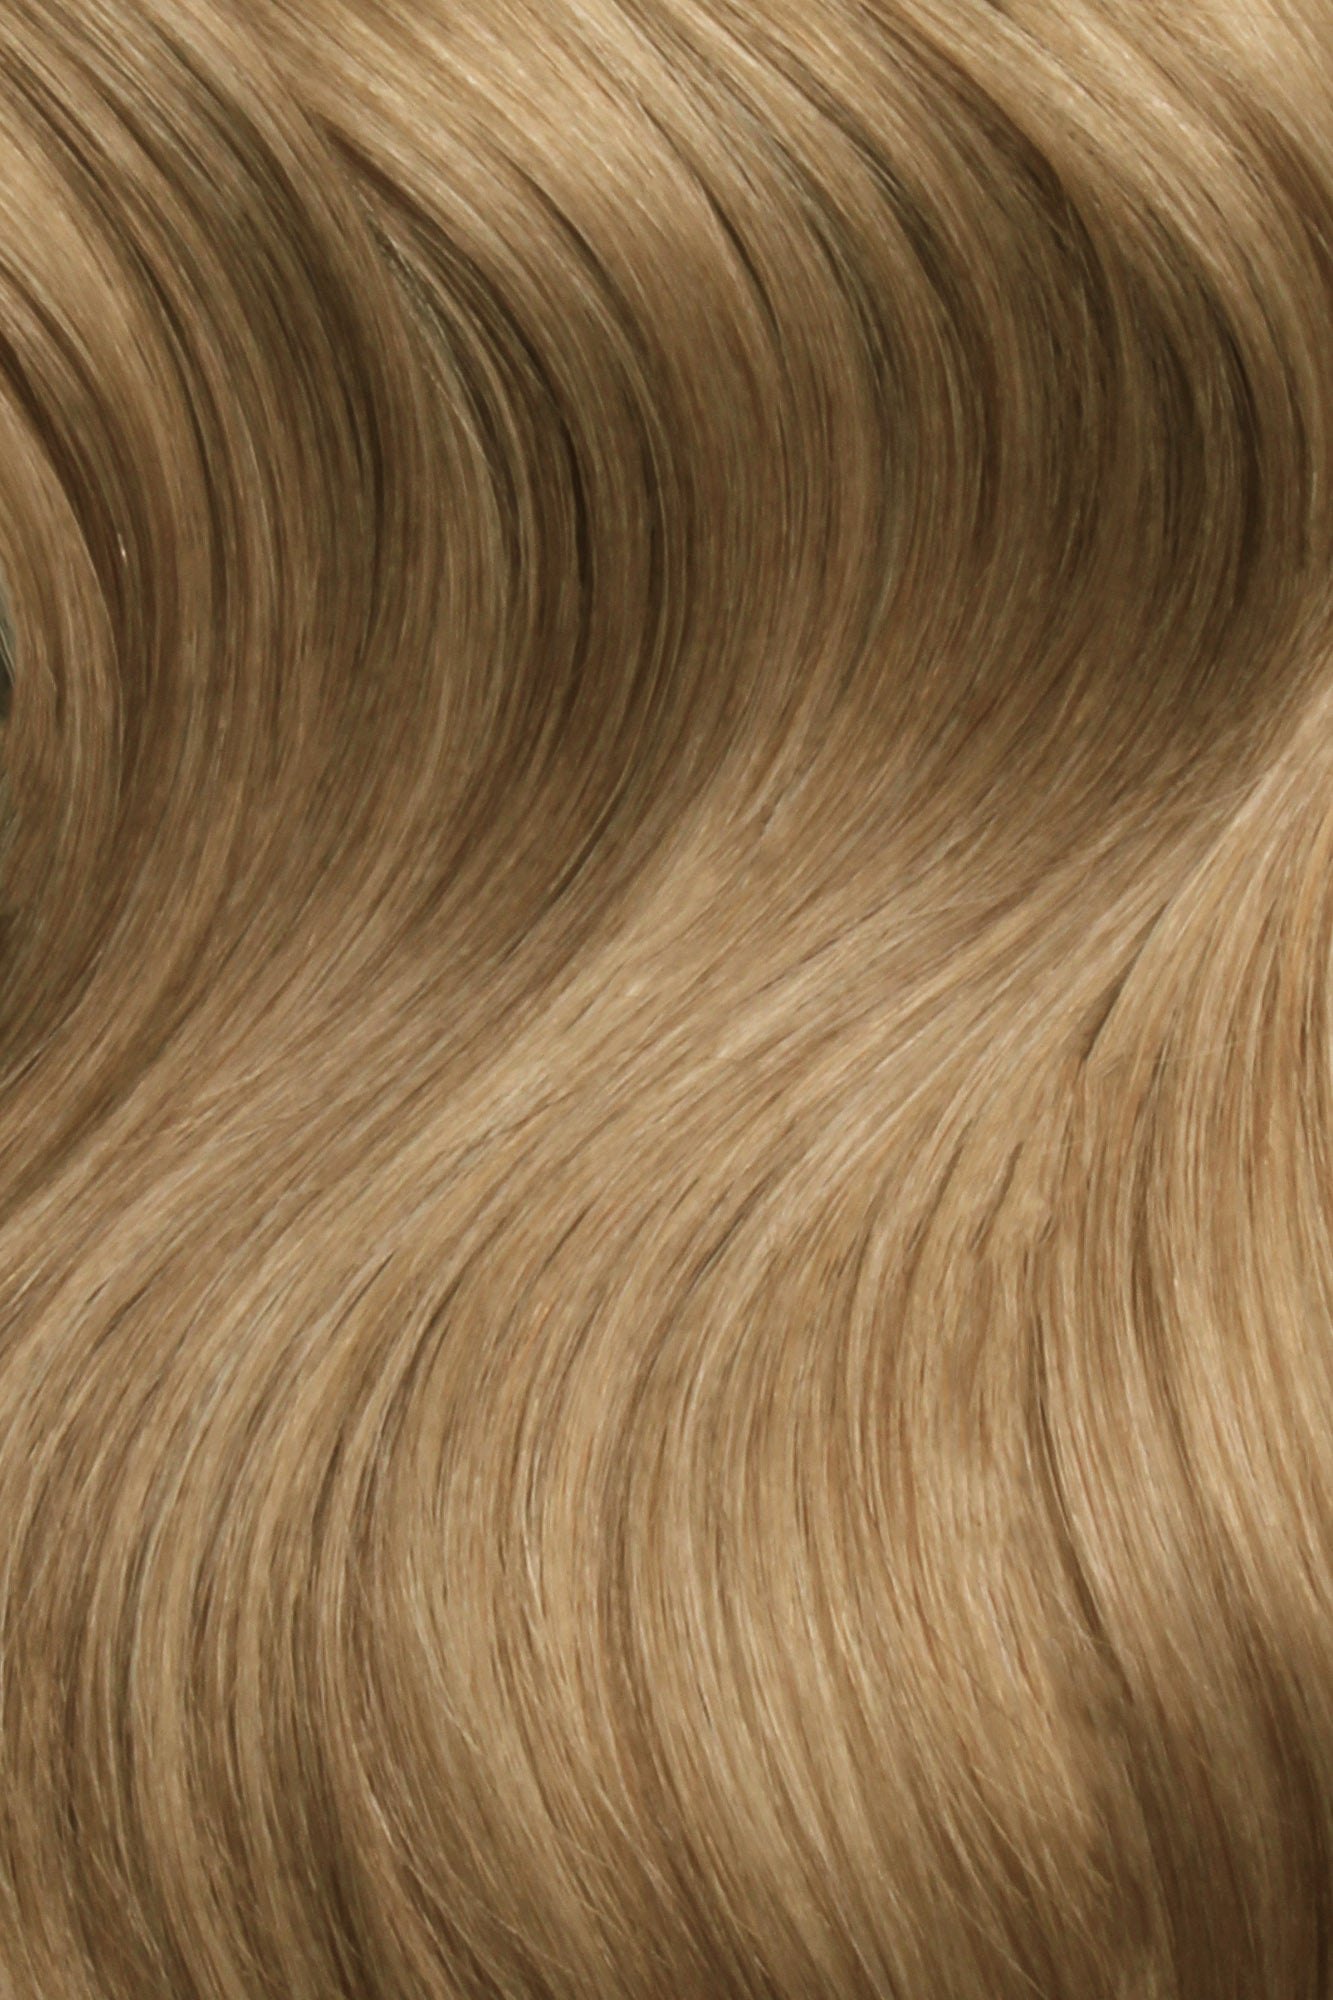 Nano Bonds 24 Inches - SWAY Hair Extensions Champagne-Chestnut-8-22 Ultra-fine, invisible bonds for a flawless, natural look. 100% Remy Human hair, lightweight and versatile. Reusable and perfect for individual or salon use.